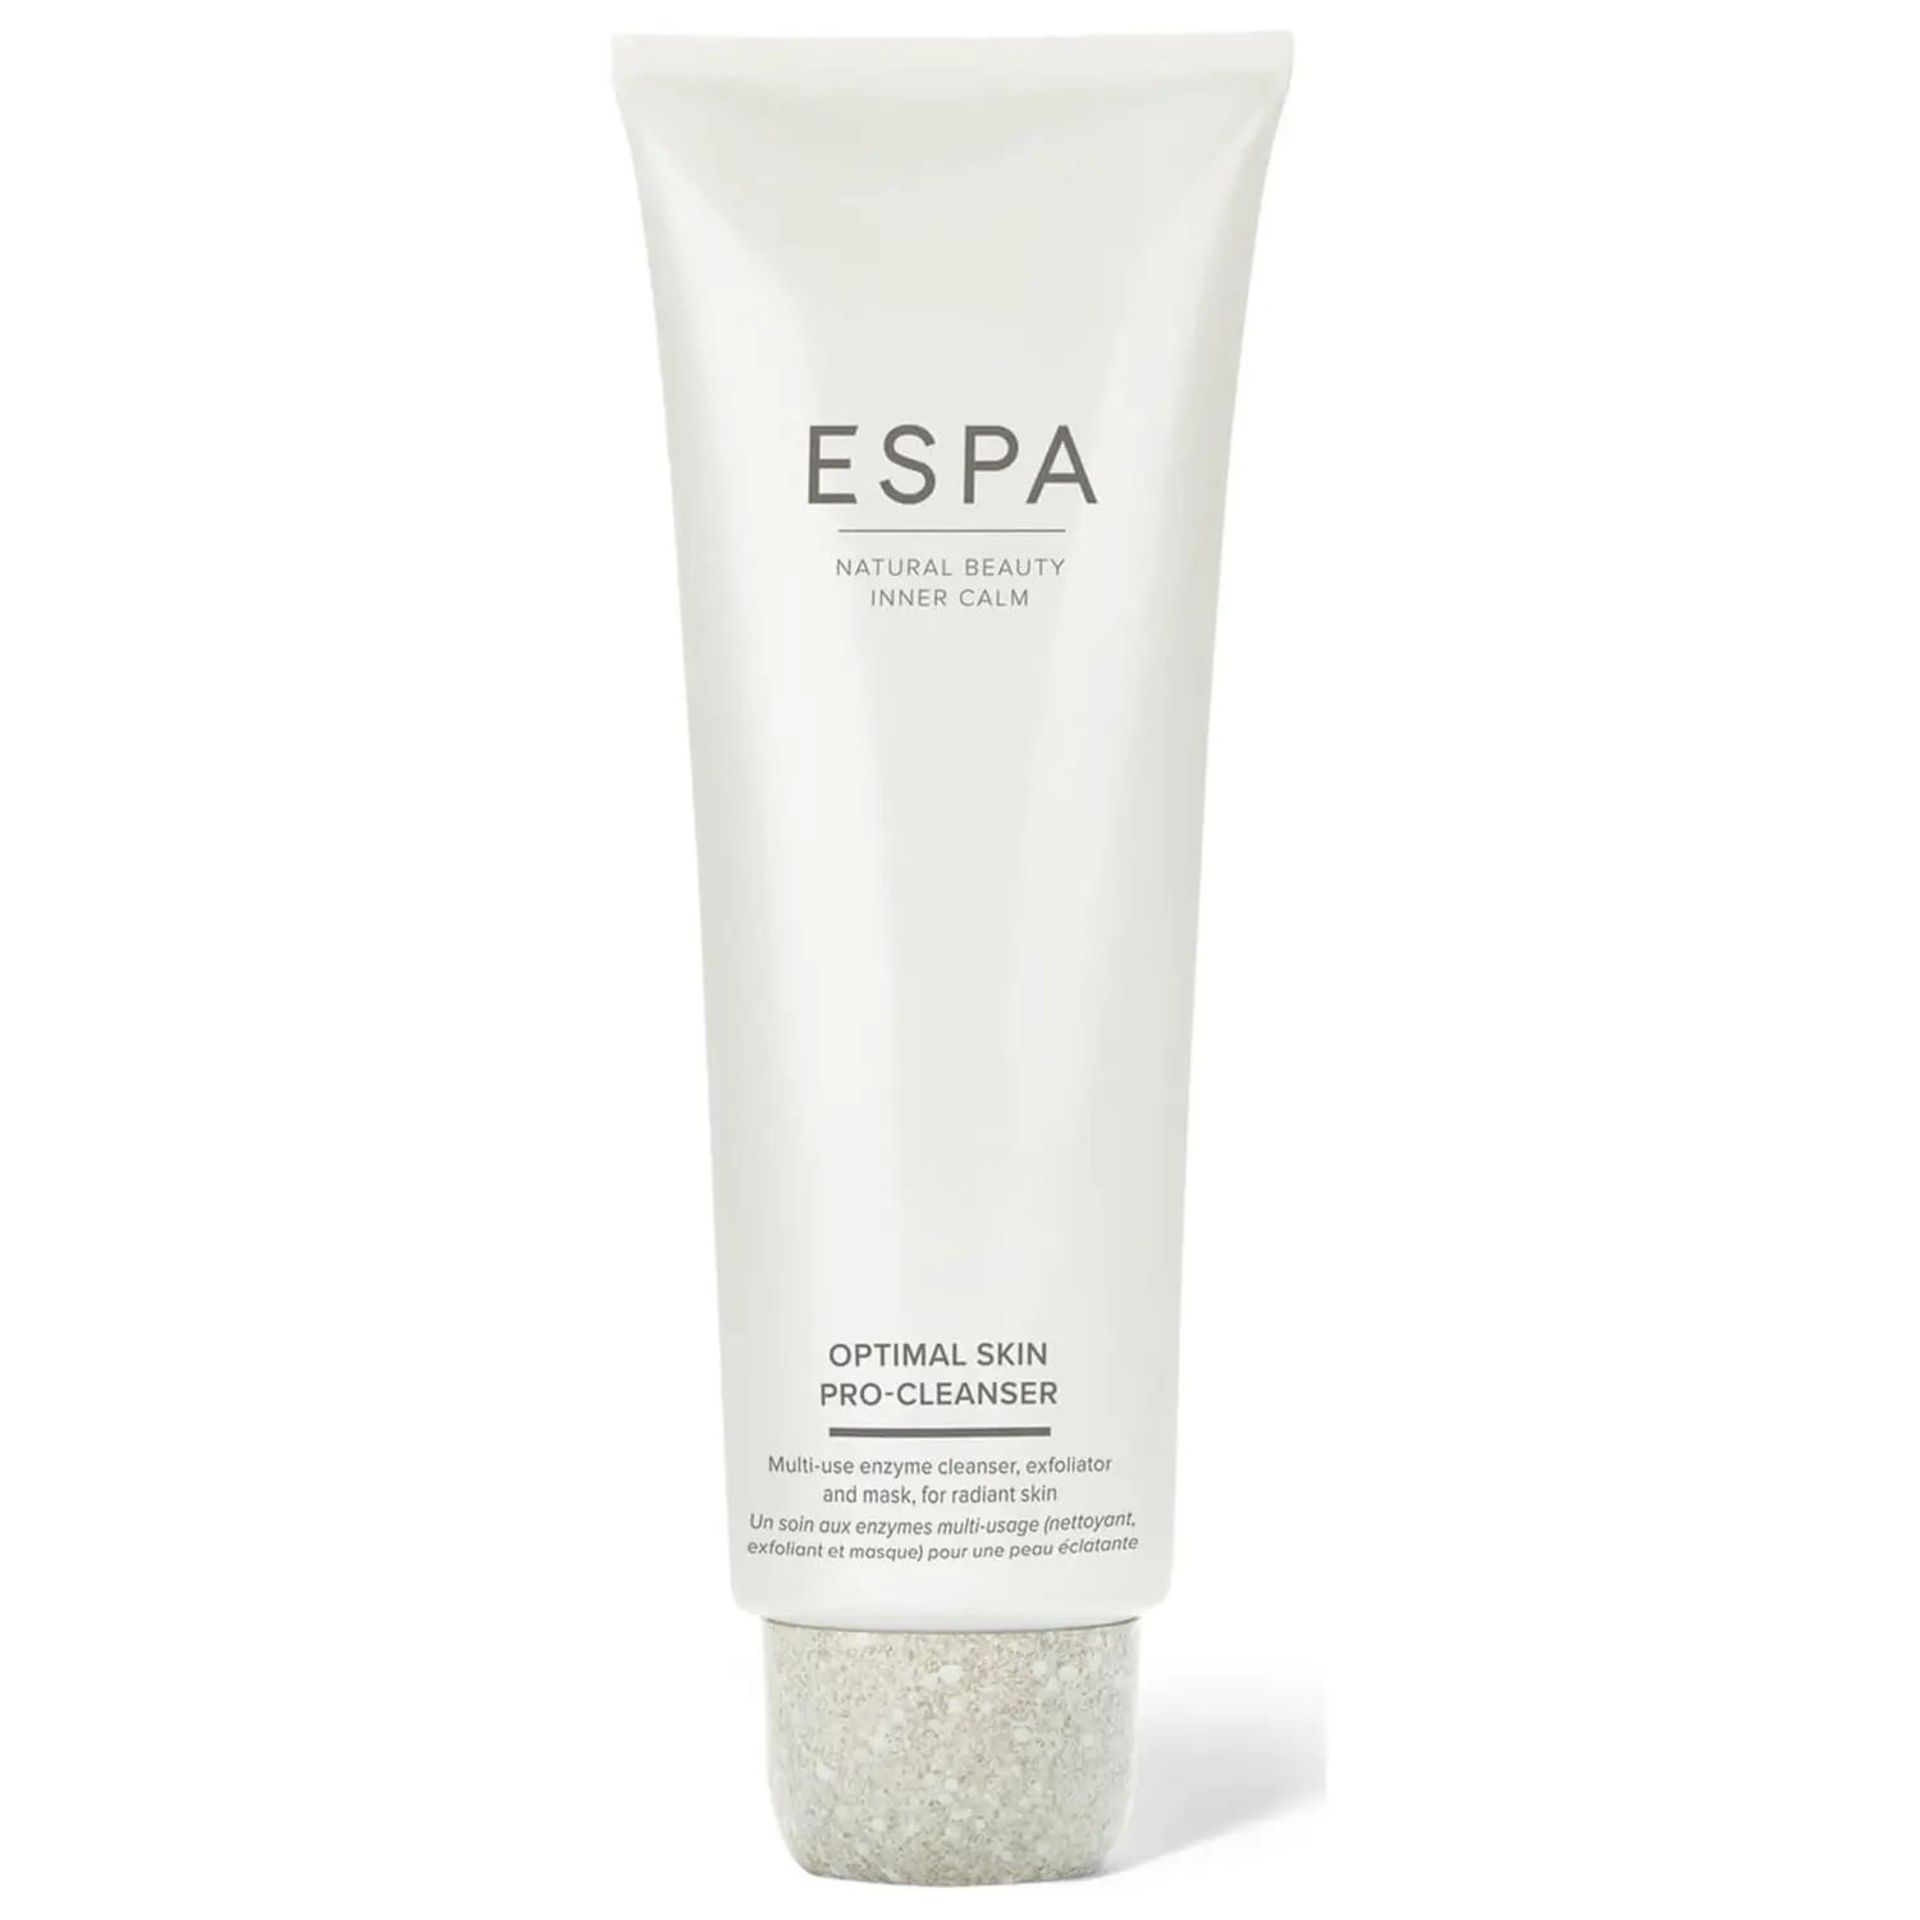 TRADE LOT TO CONTAIN 30x NEW ESPA Optimal Skin Pro-Cleanser 100ml. RRP £32 Each. EBR. 3 in 1: